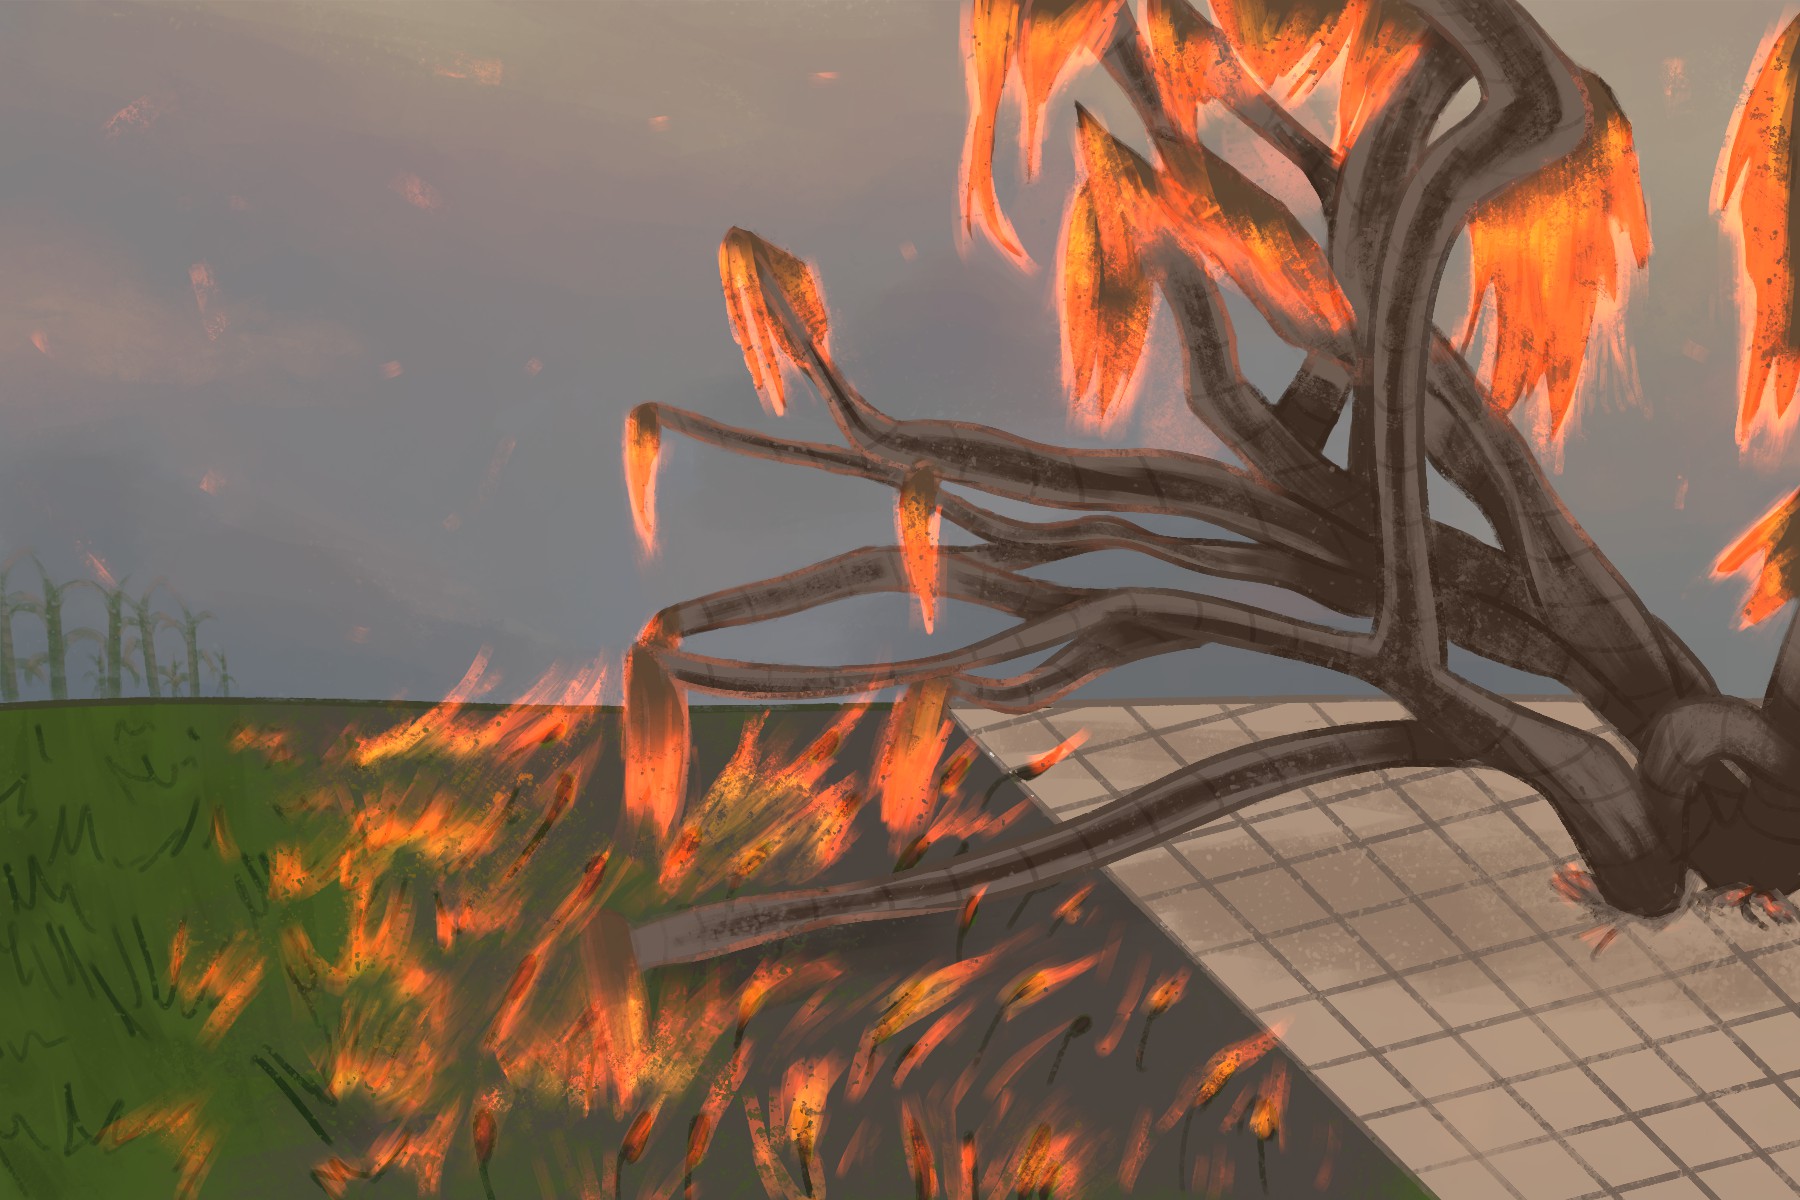 In an article discussing the tragic fires in Maui, a tree is on fire as its limbs drape over.